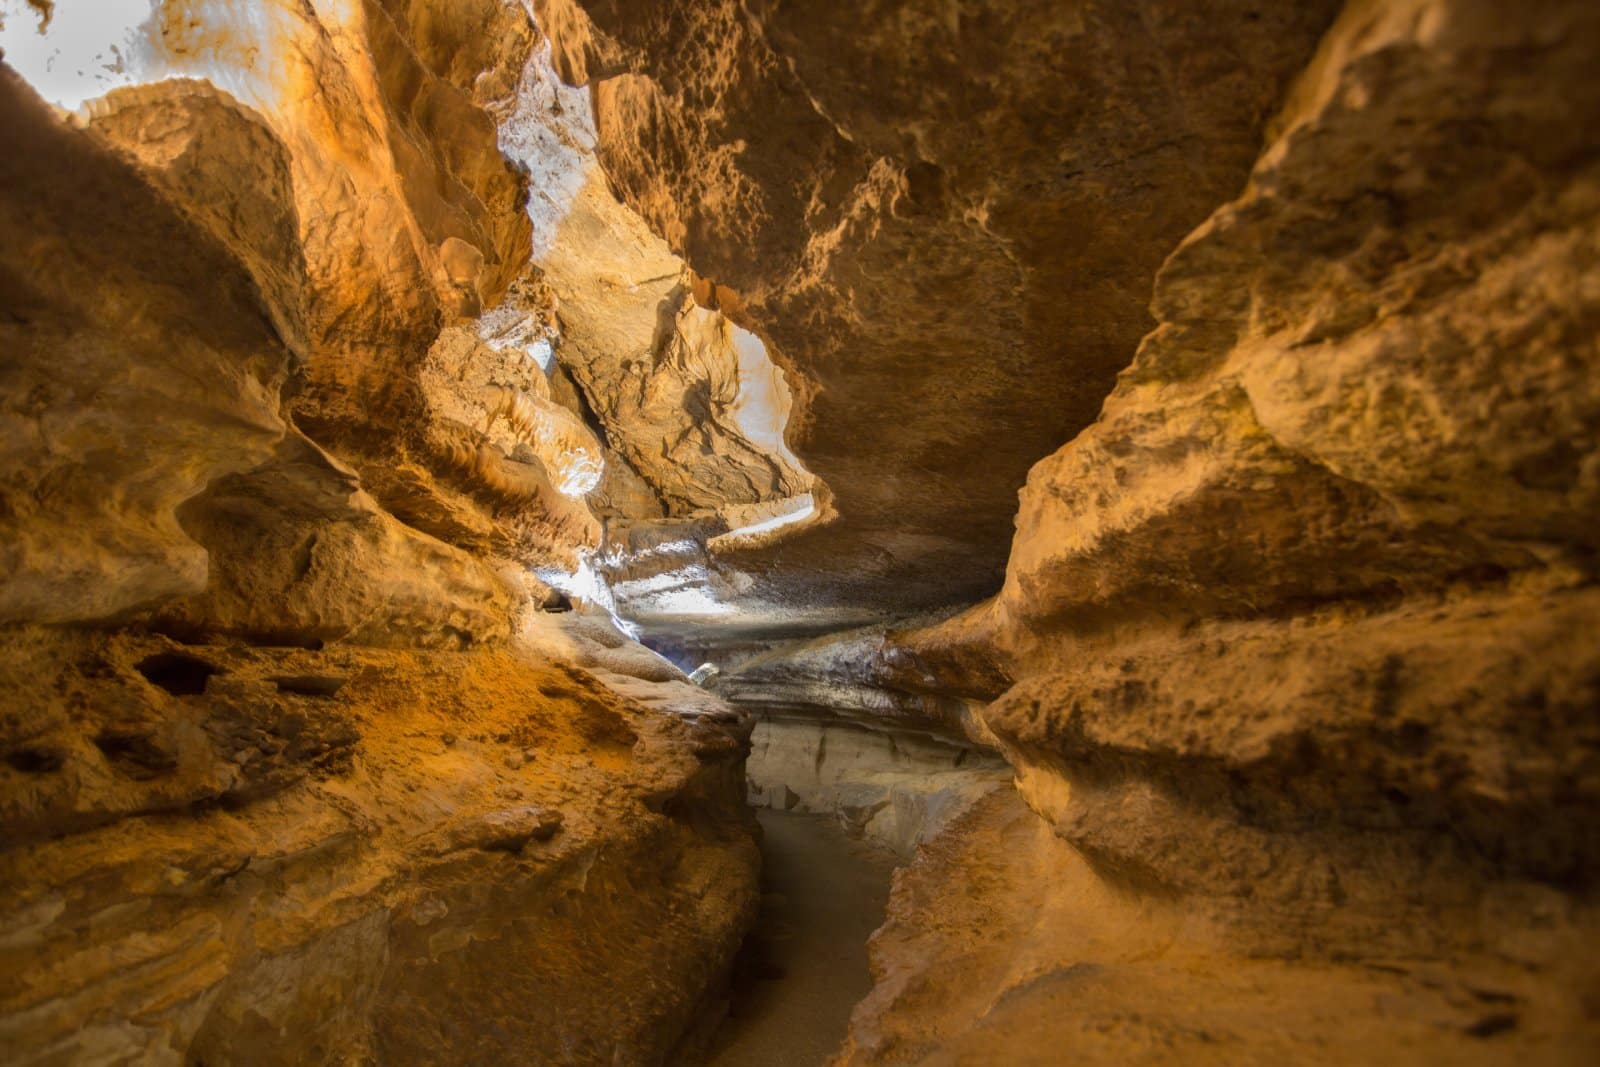 <p class="wp-caption-text">Image Credit: Shutterstock / Roni Ben Ishay</p>  <p><span>Inside Lookout Mountain lies Ruby Falls, an underground marvel that offers a mystical experience far beneath the earth’s surface. With around 400,000 visitors annually, it’s a testament to the allure of hidden wonders.</span></p>